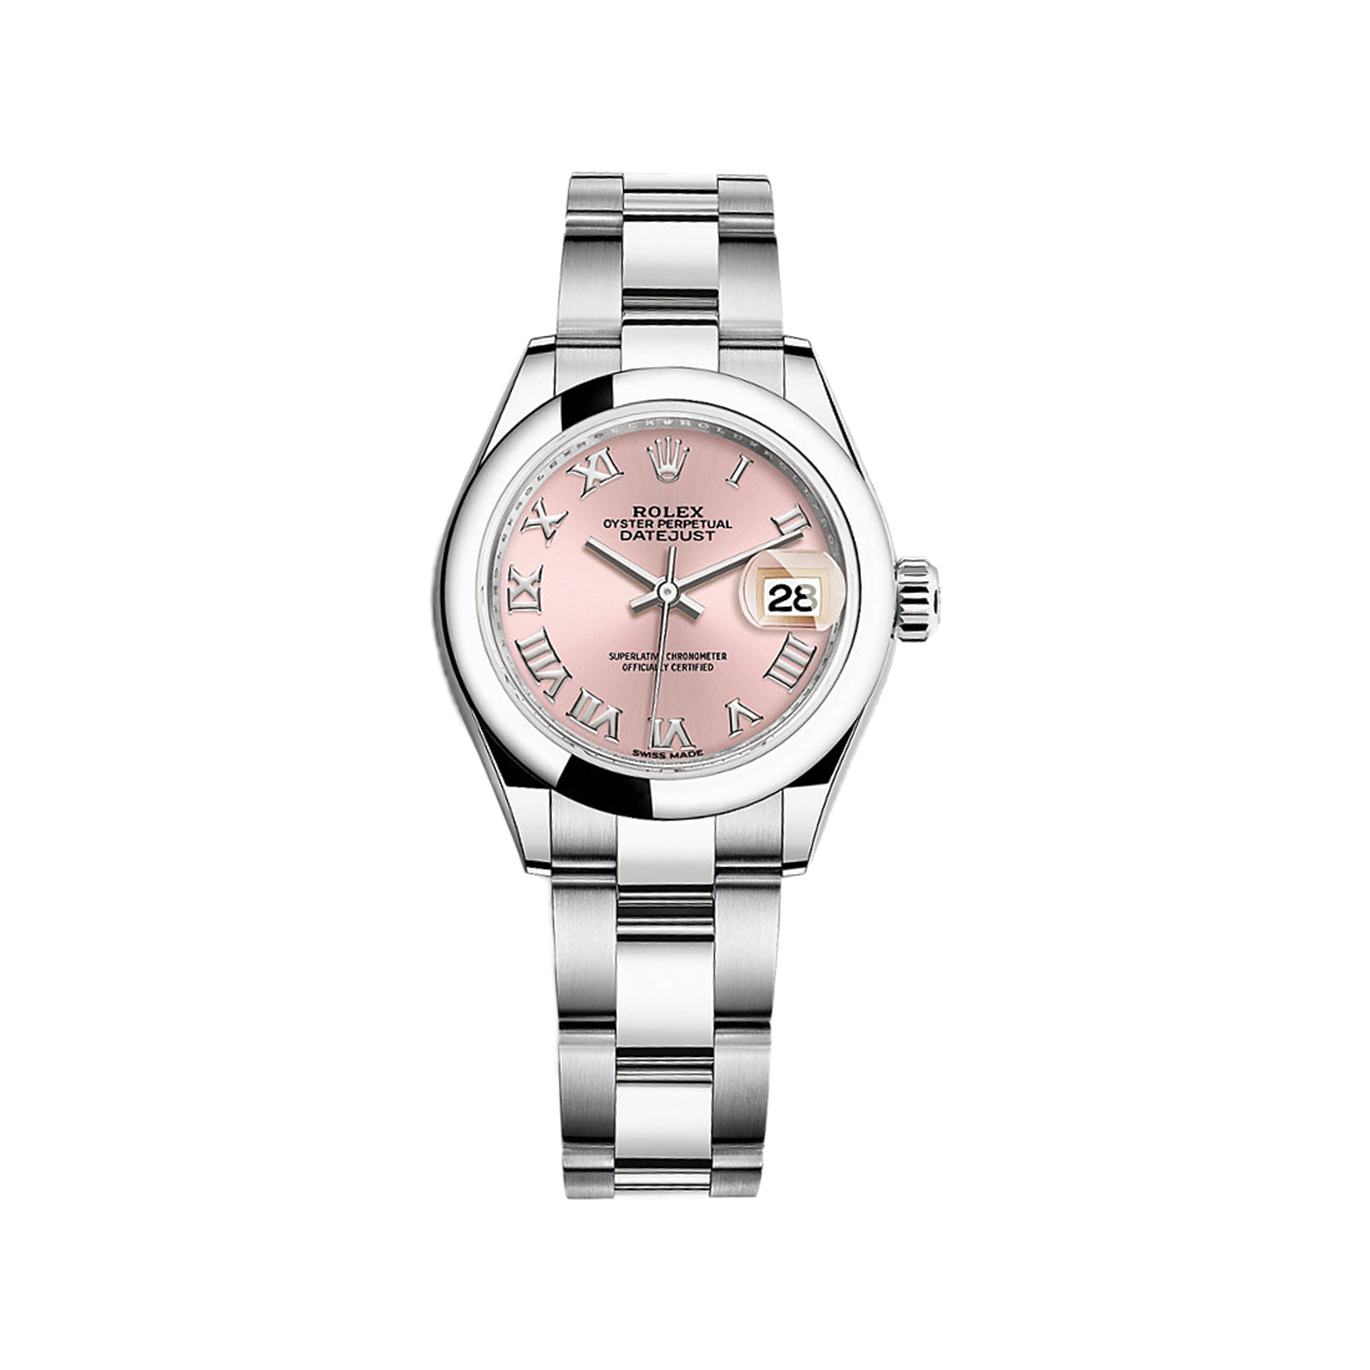 Lady-Datejust 28 279160 Stainless Steel Watch (Pink)